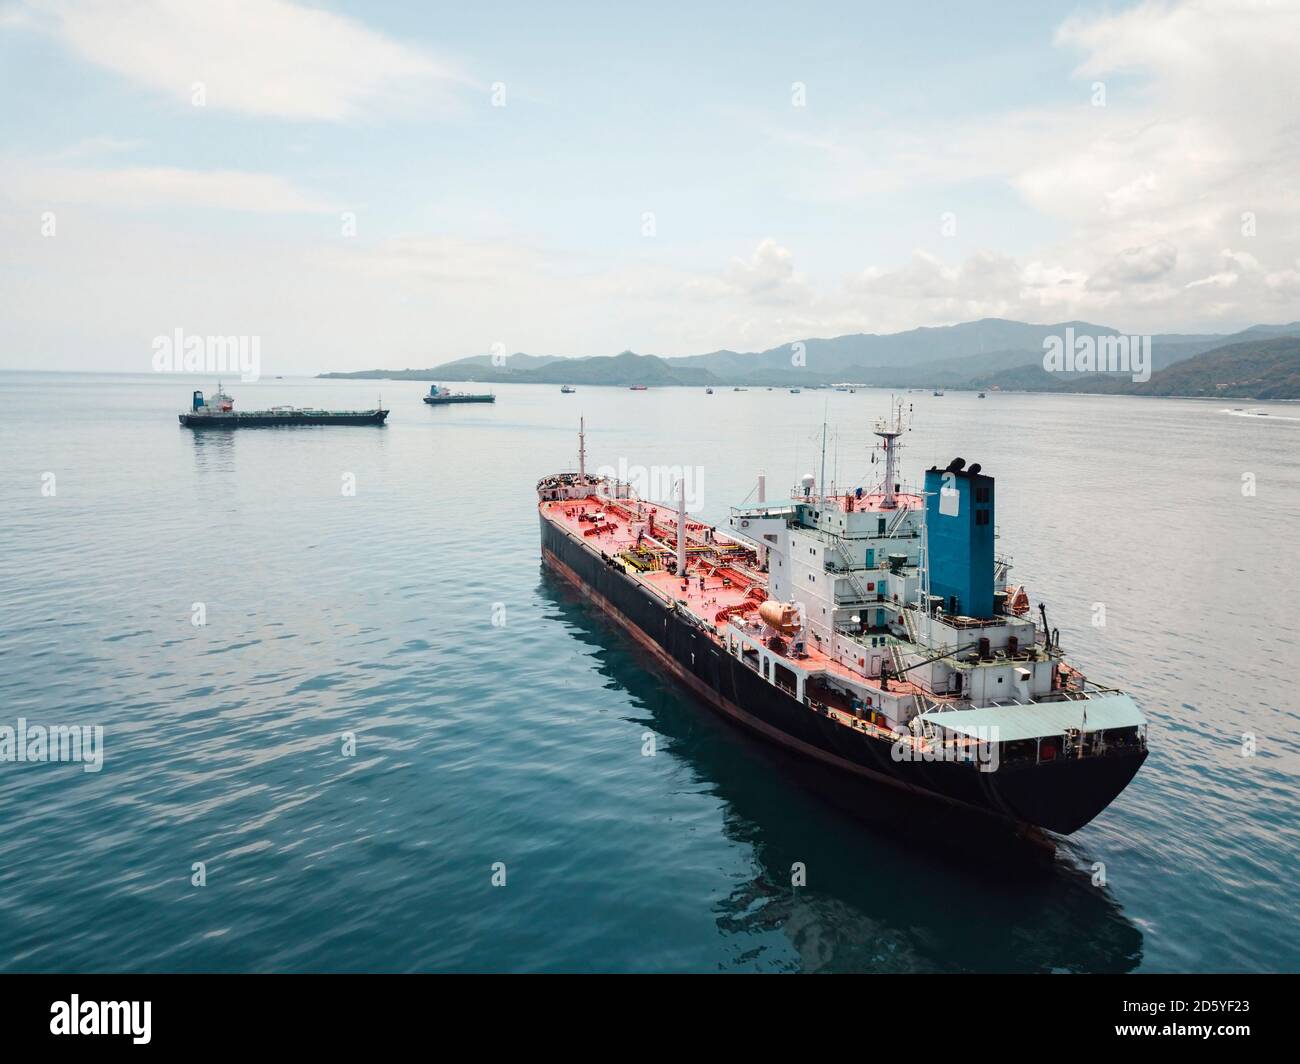 Indonesia, Bali, Aerial view of oil tanker Stock Photo